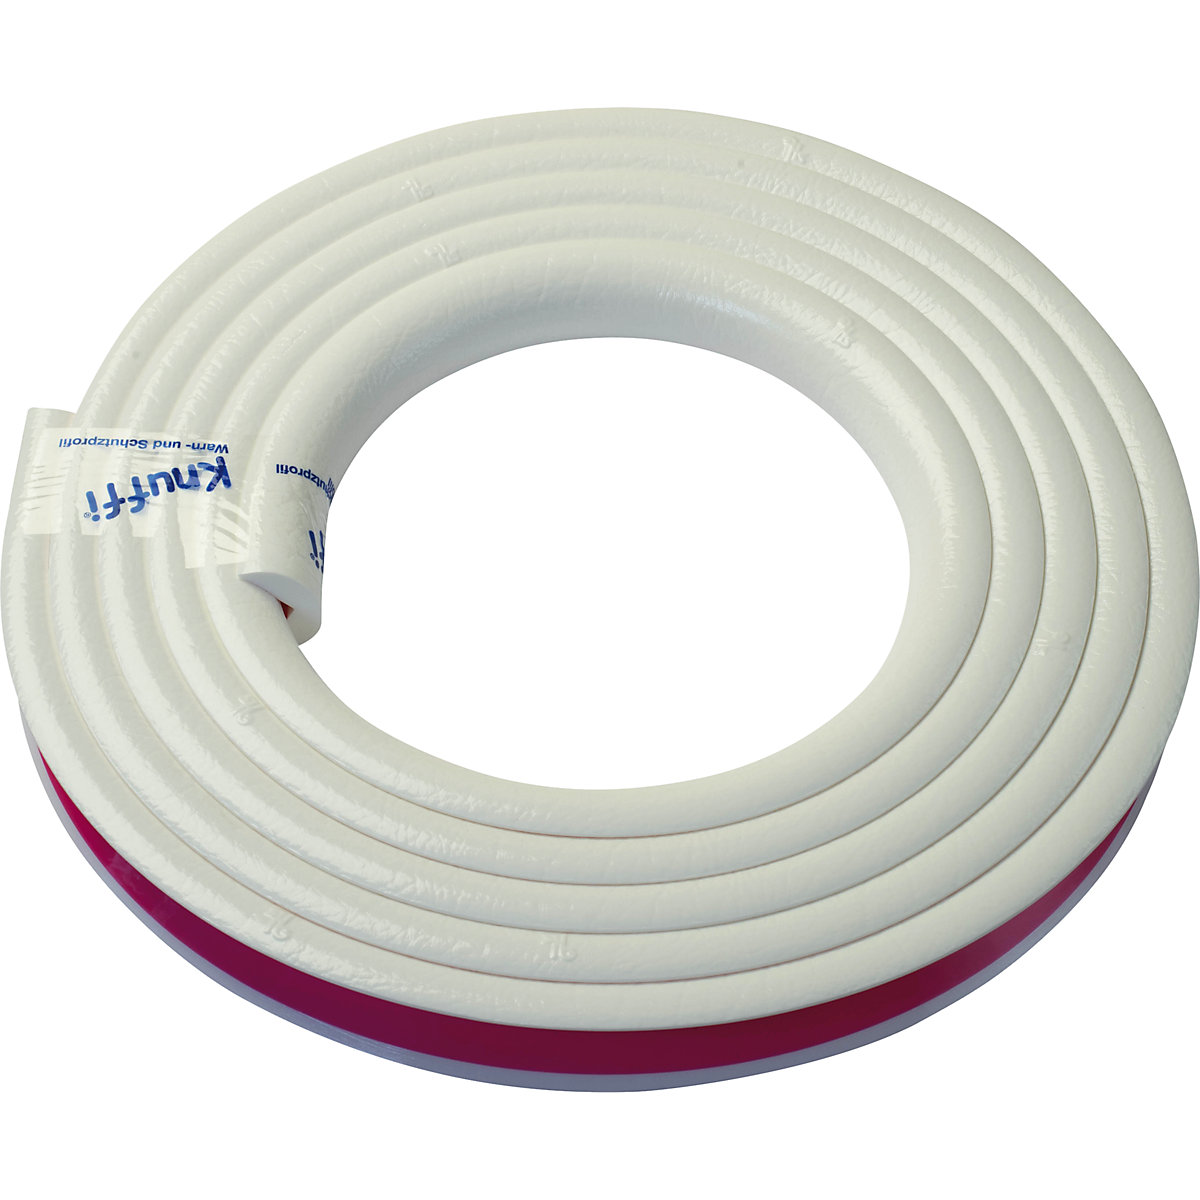 Knuffi® corner protection – SHG, type A, 1 x 5 m roll, white-20